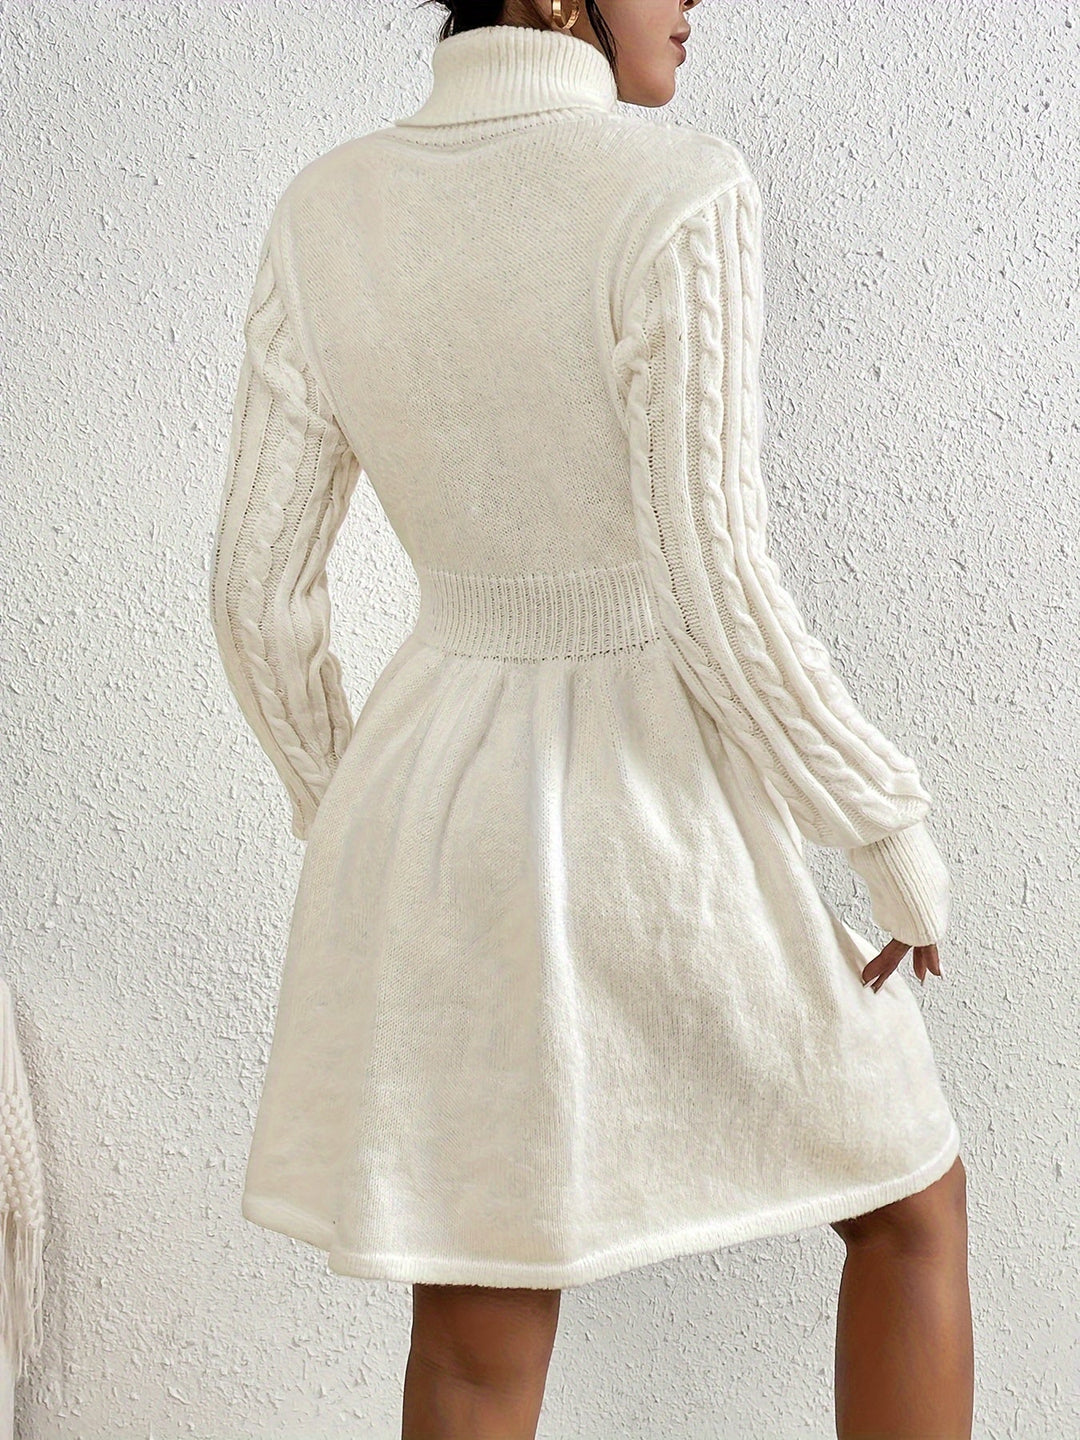 Chic Long Sleeve Cable Knit Turtleneck Mini Sweater Dress - Gen U Us Products